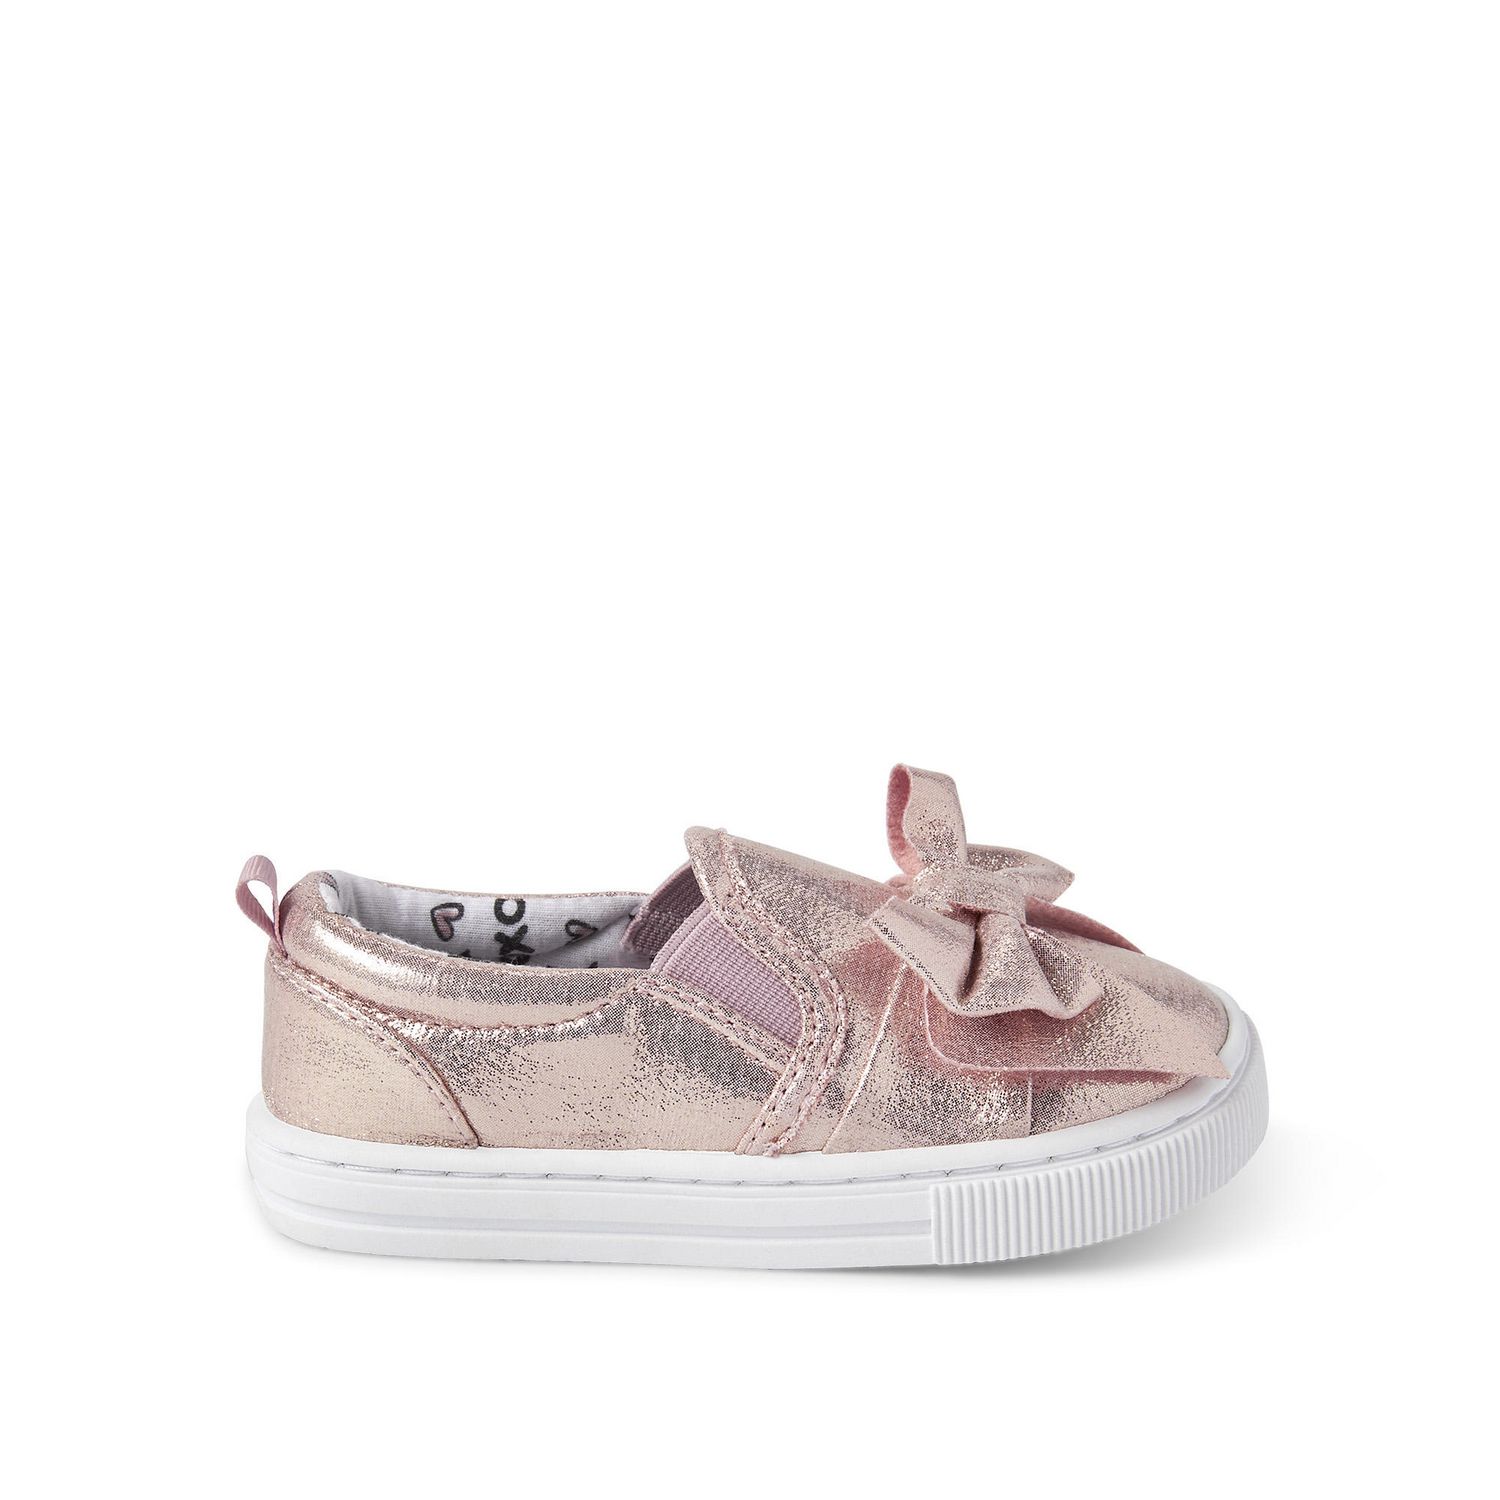 George Toddler Girls' Bow Slip On Sneakers | Walmart Canada